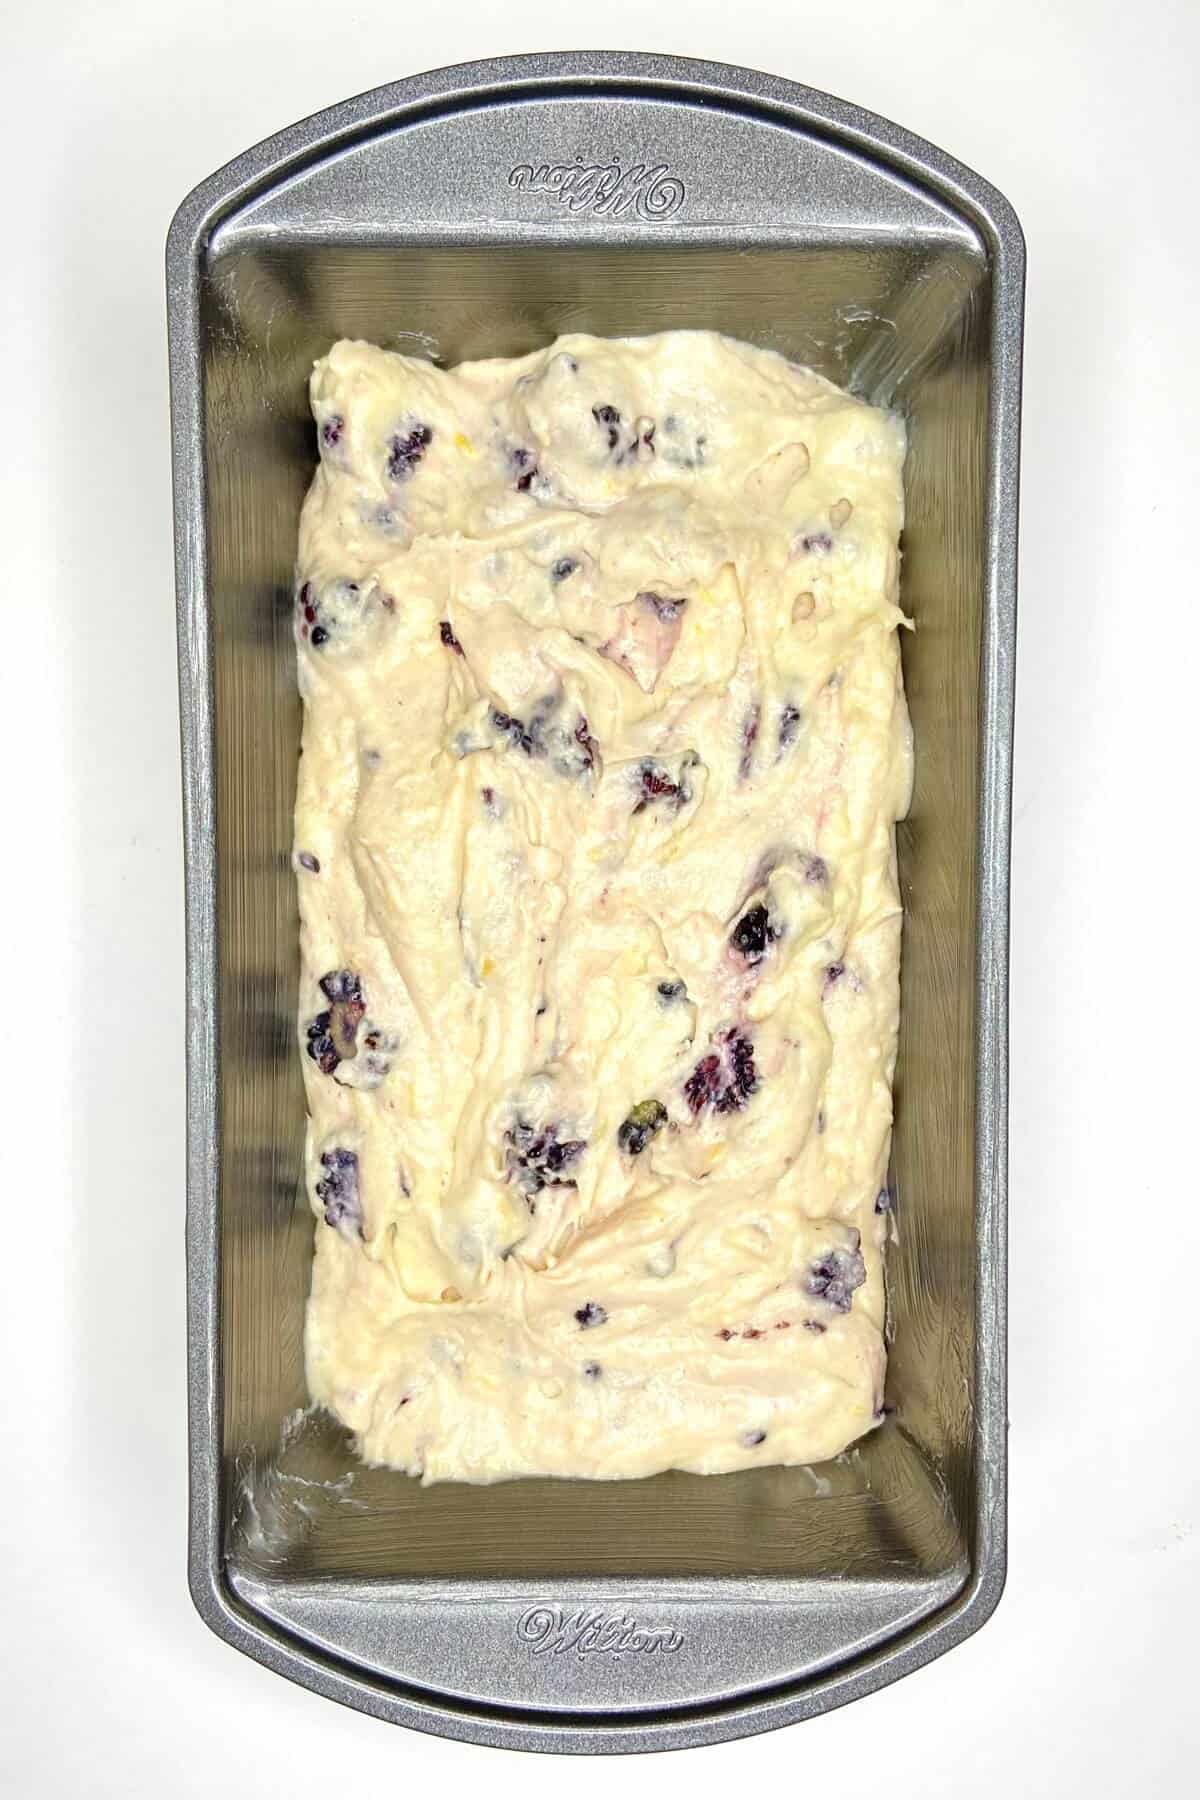 Mixed batter in the loaf pan. 